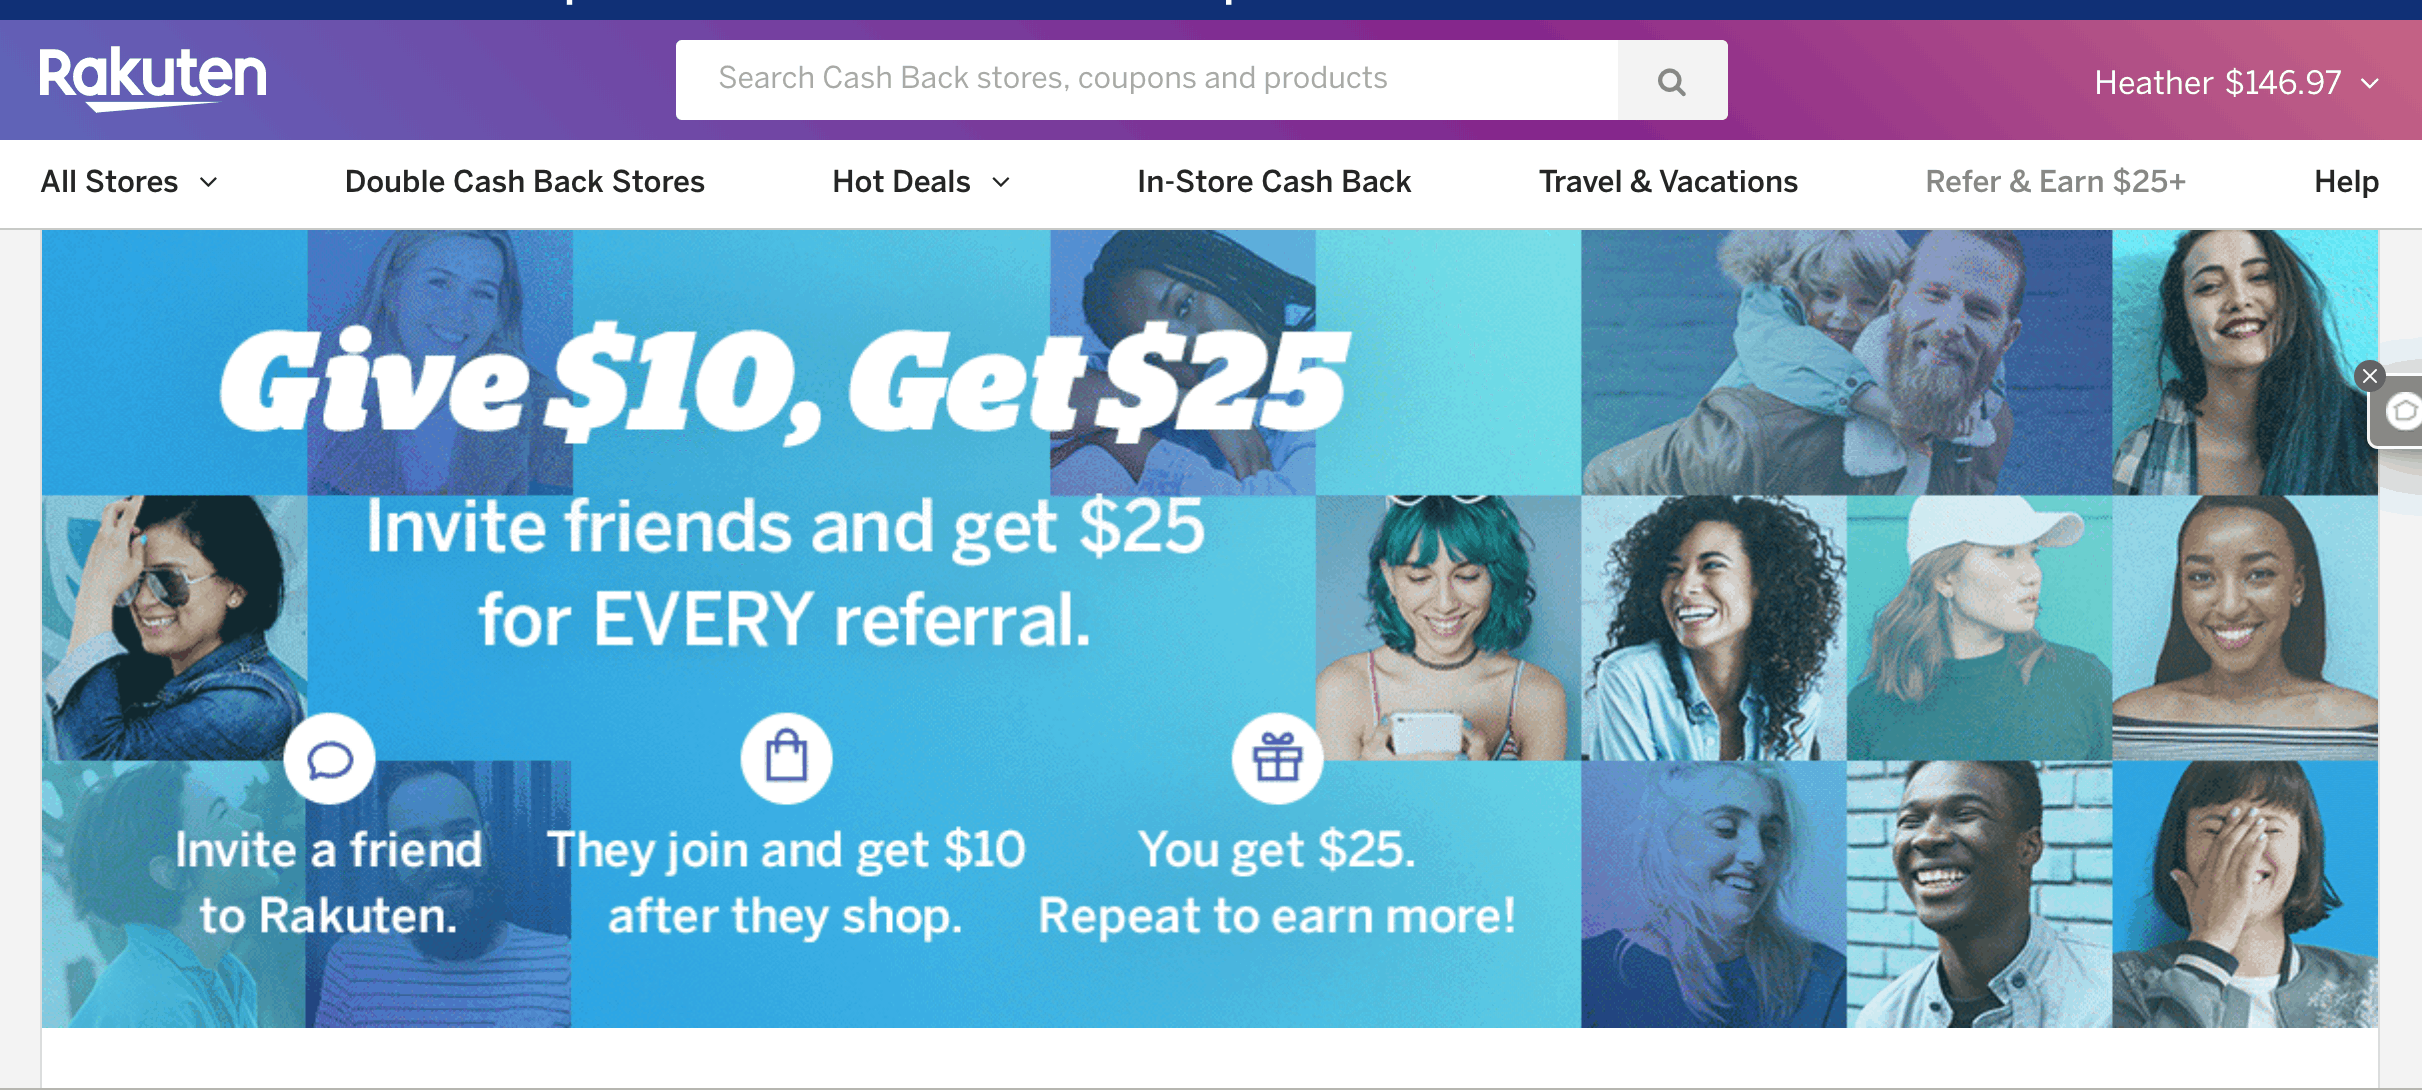 Rakuten is one of the best referral programs that pay you cash for referring your friends.